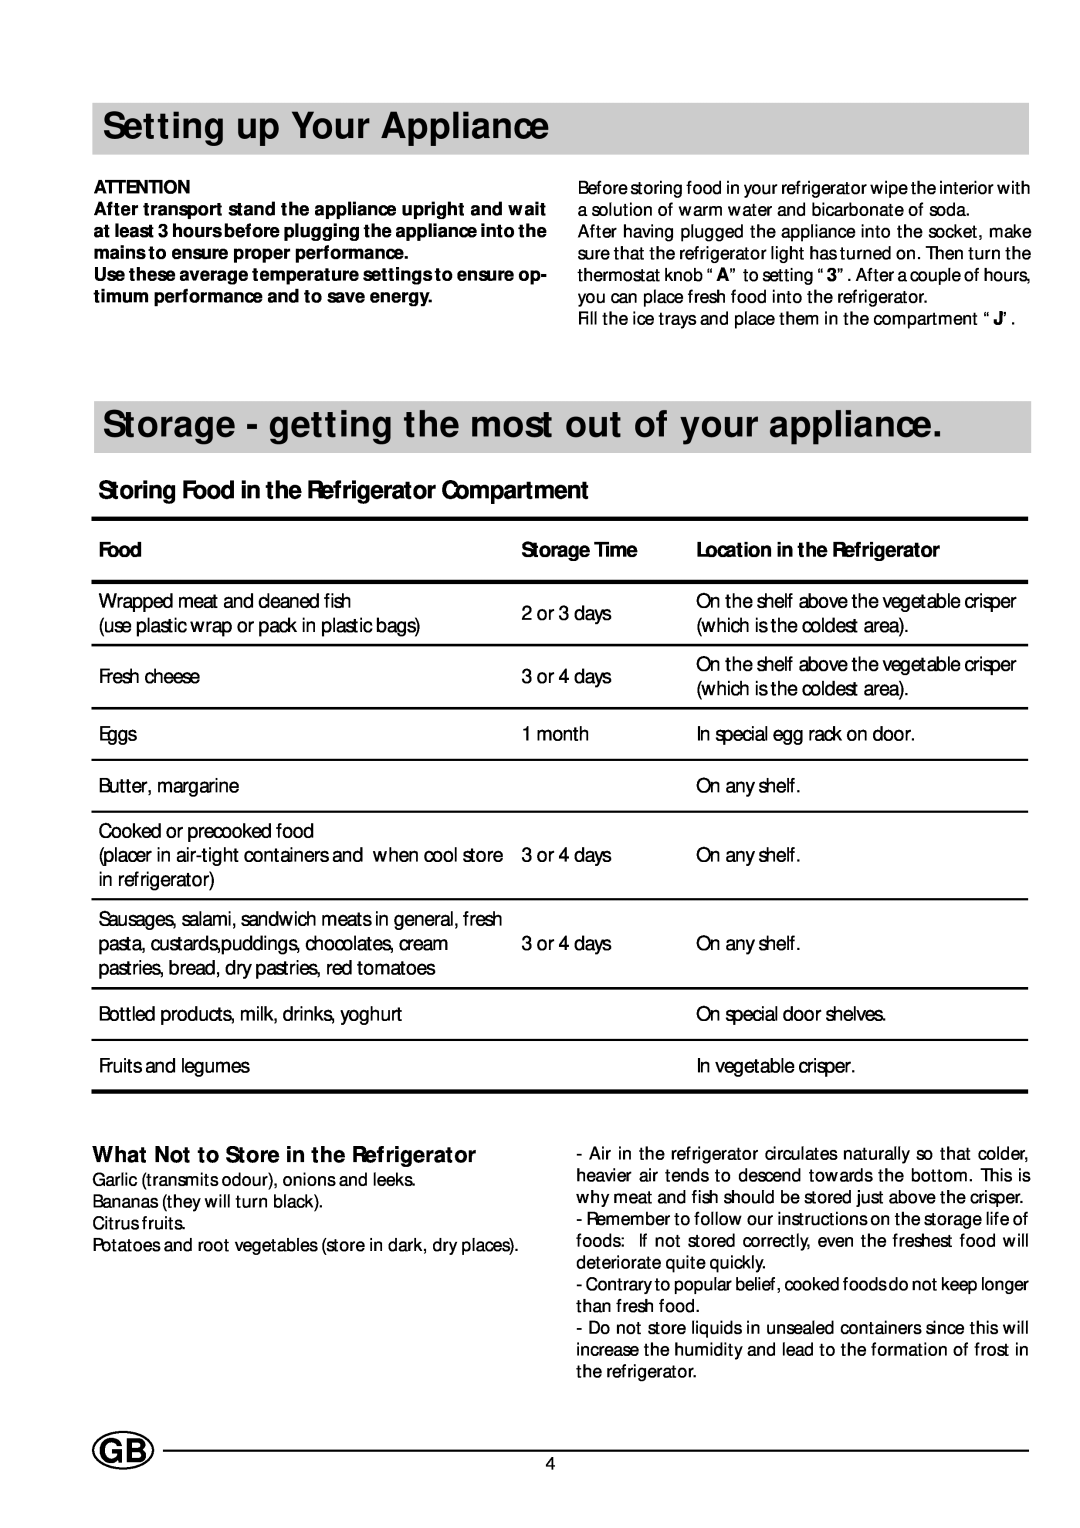 Indesit GS 164 I UK manual Setting up Your Appliance, Storage - getting the most out of your appliance, Food, Storage Time 